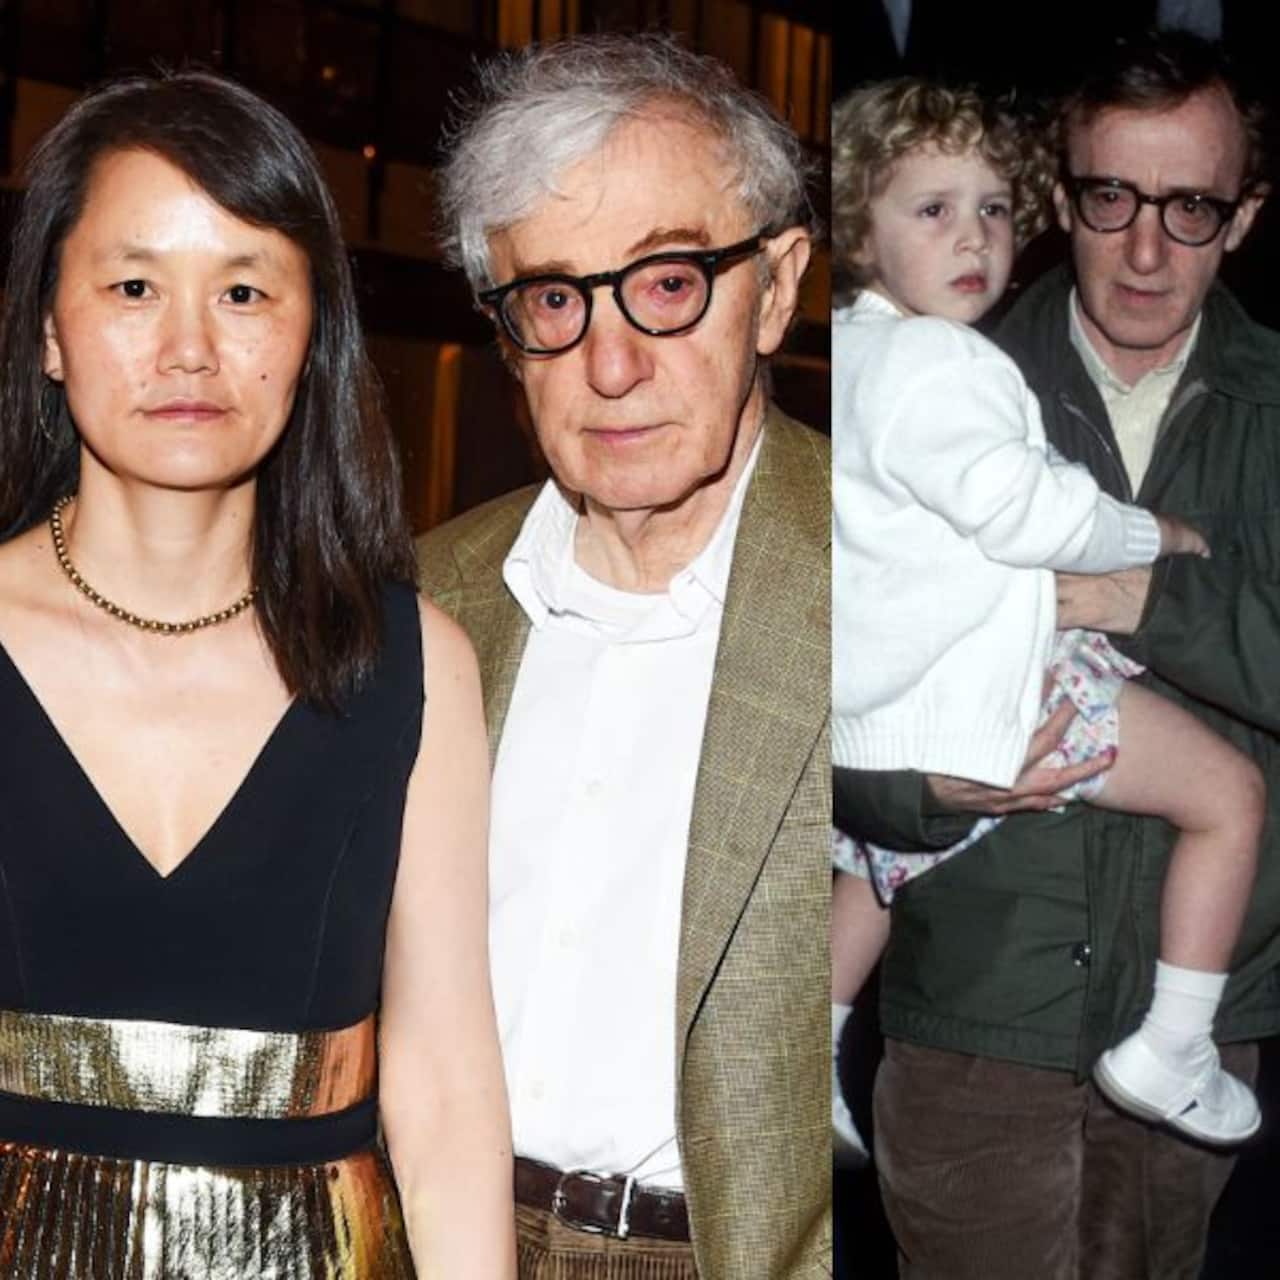 Did you know 4-time Oscar winner Woody Allen married his step daughter Soon-Yi Previn, and was accused of sexual abuse by adopted daughter Dylan Farrow?